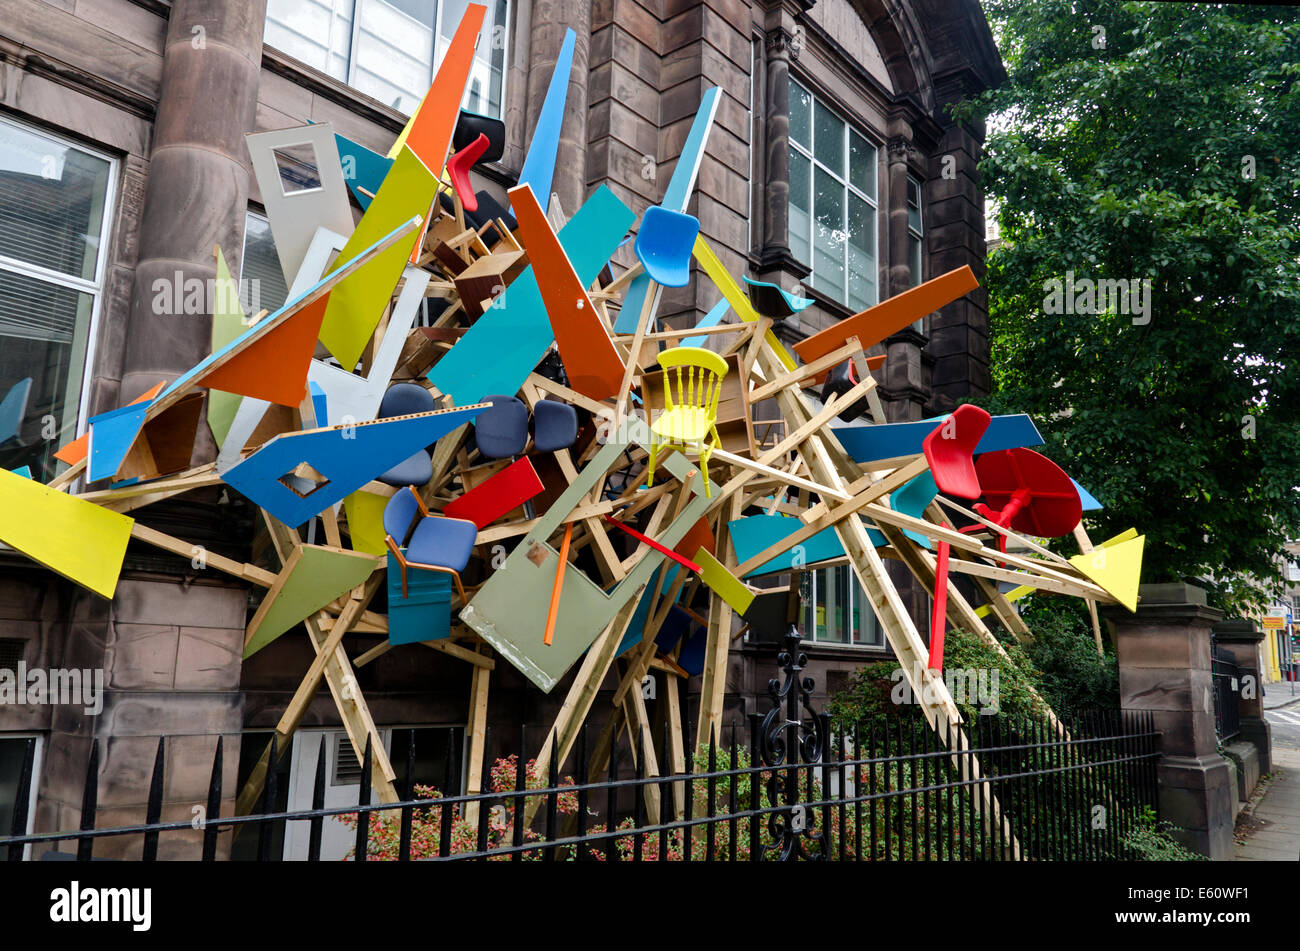 Virus, an installation by the Mexican artist Antonio O'Connell at Summerhall in Edinburgh as part of the Edinburgh Festival. Stock Photo